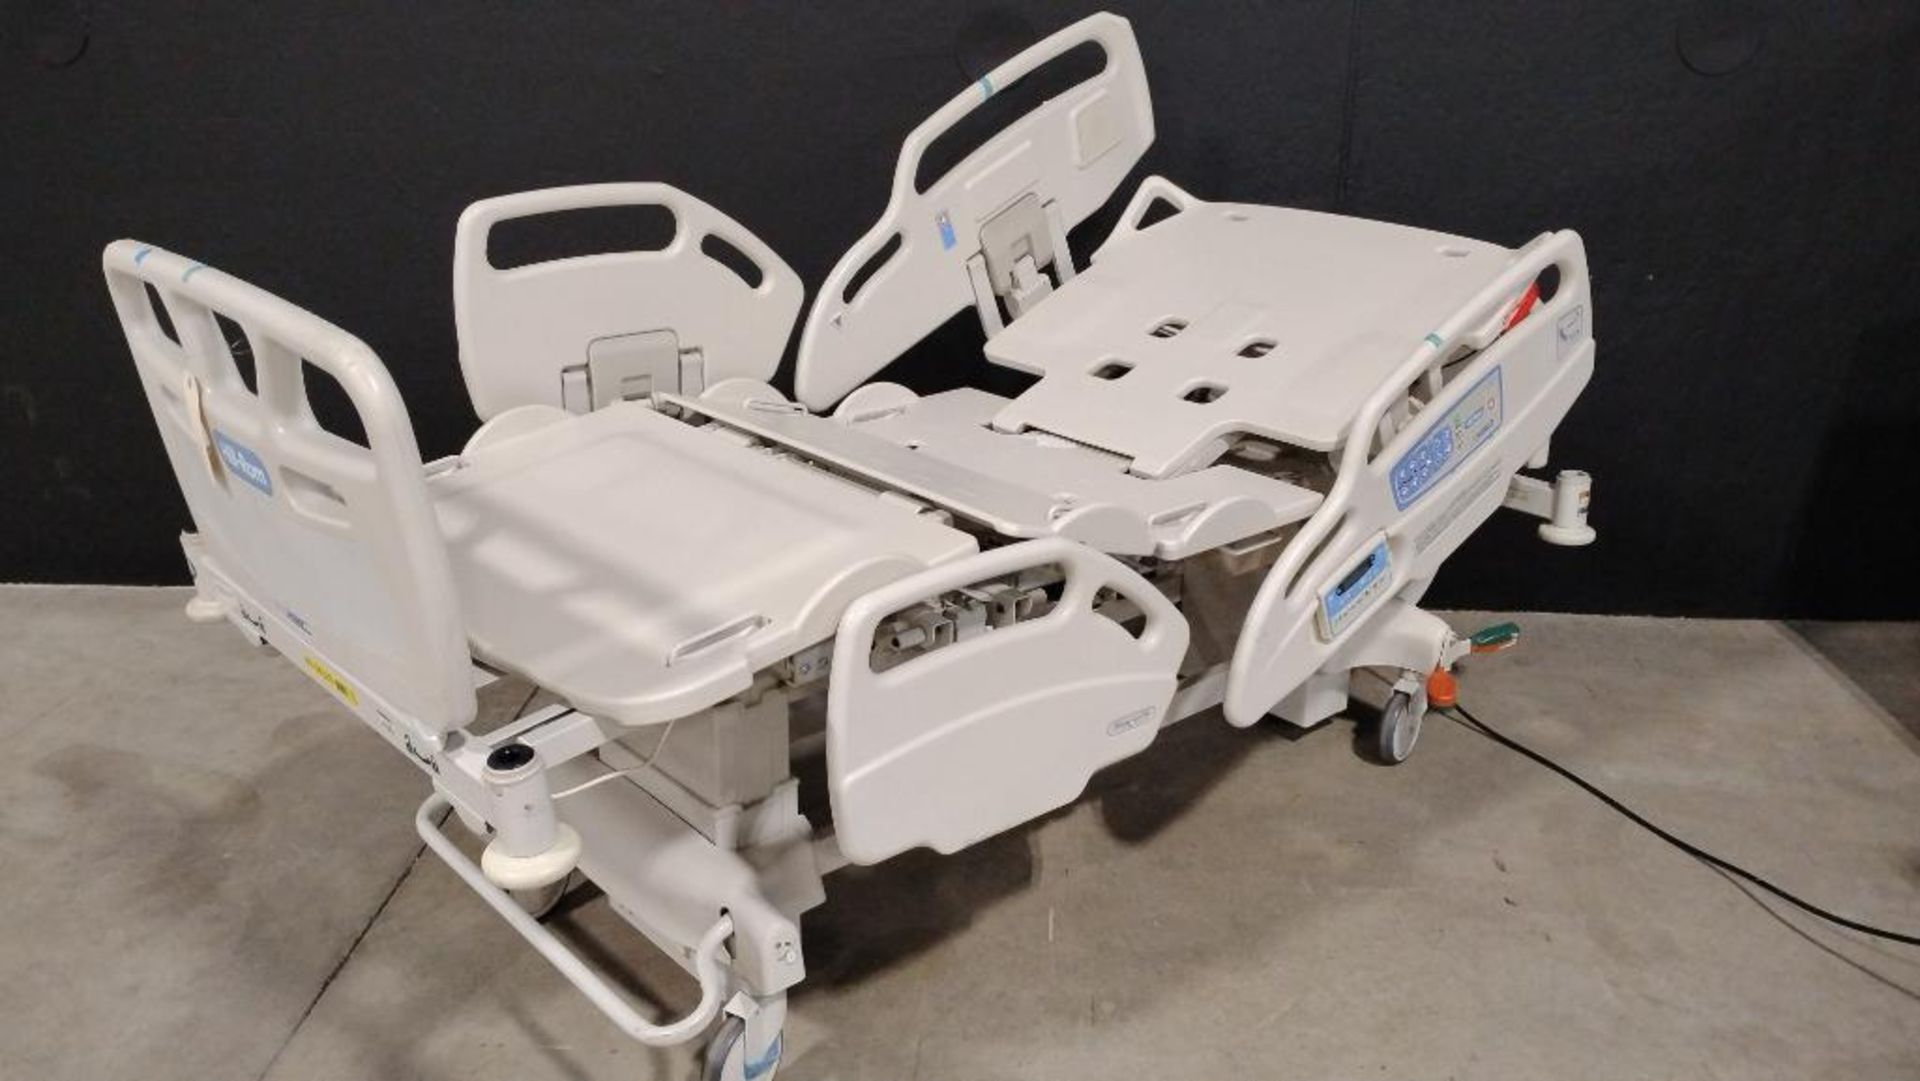 HILL-ROM CARE ASSIST ES 1170G HOSPITAL BED